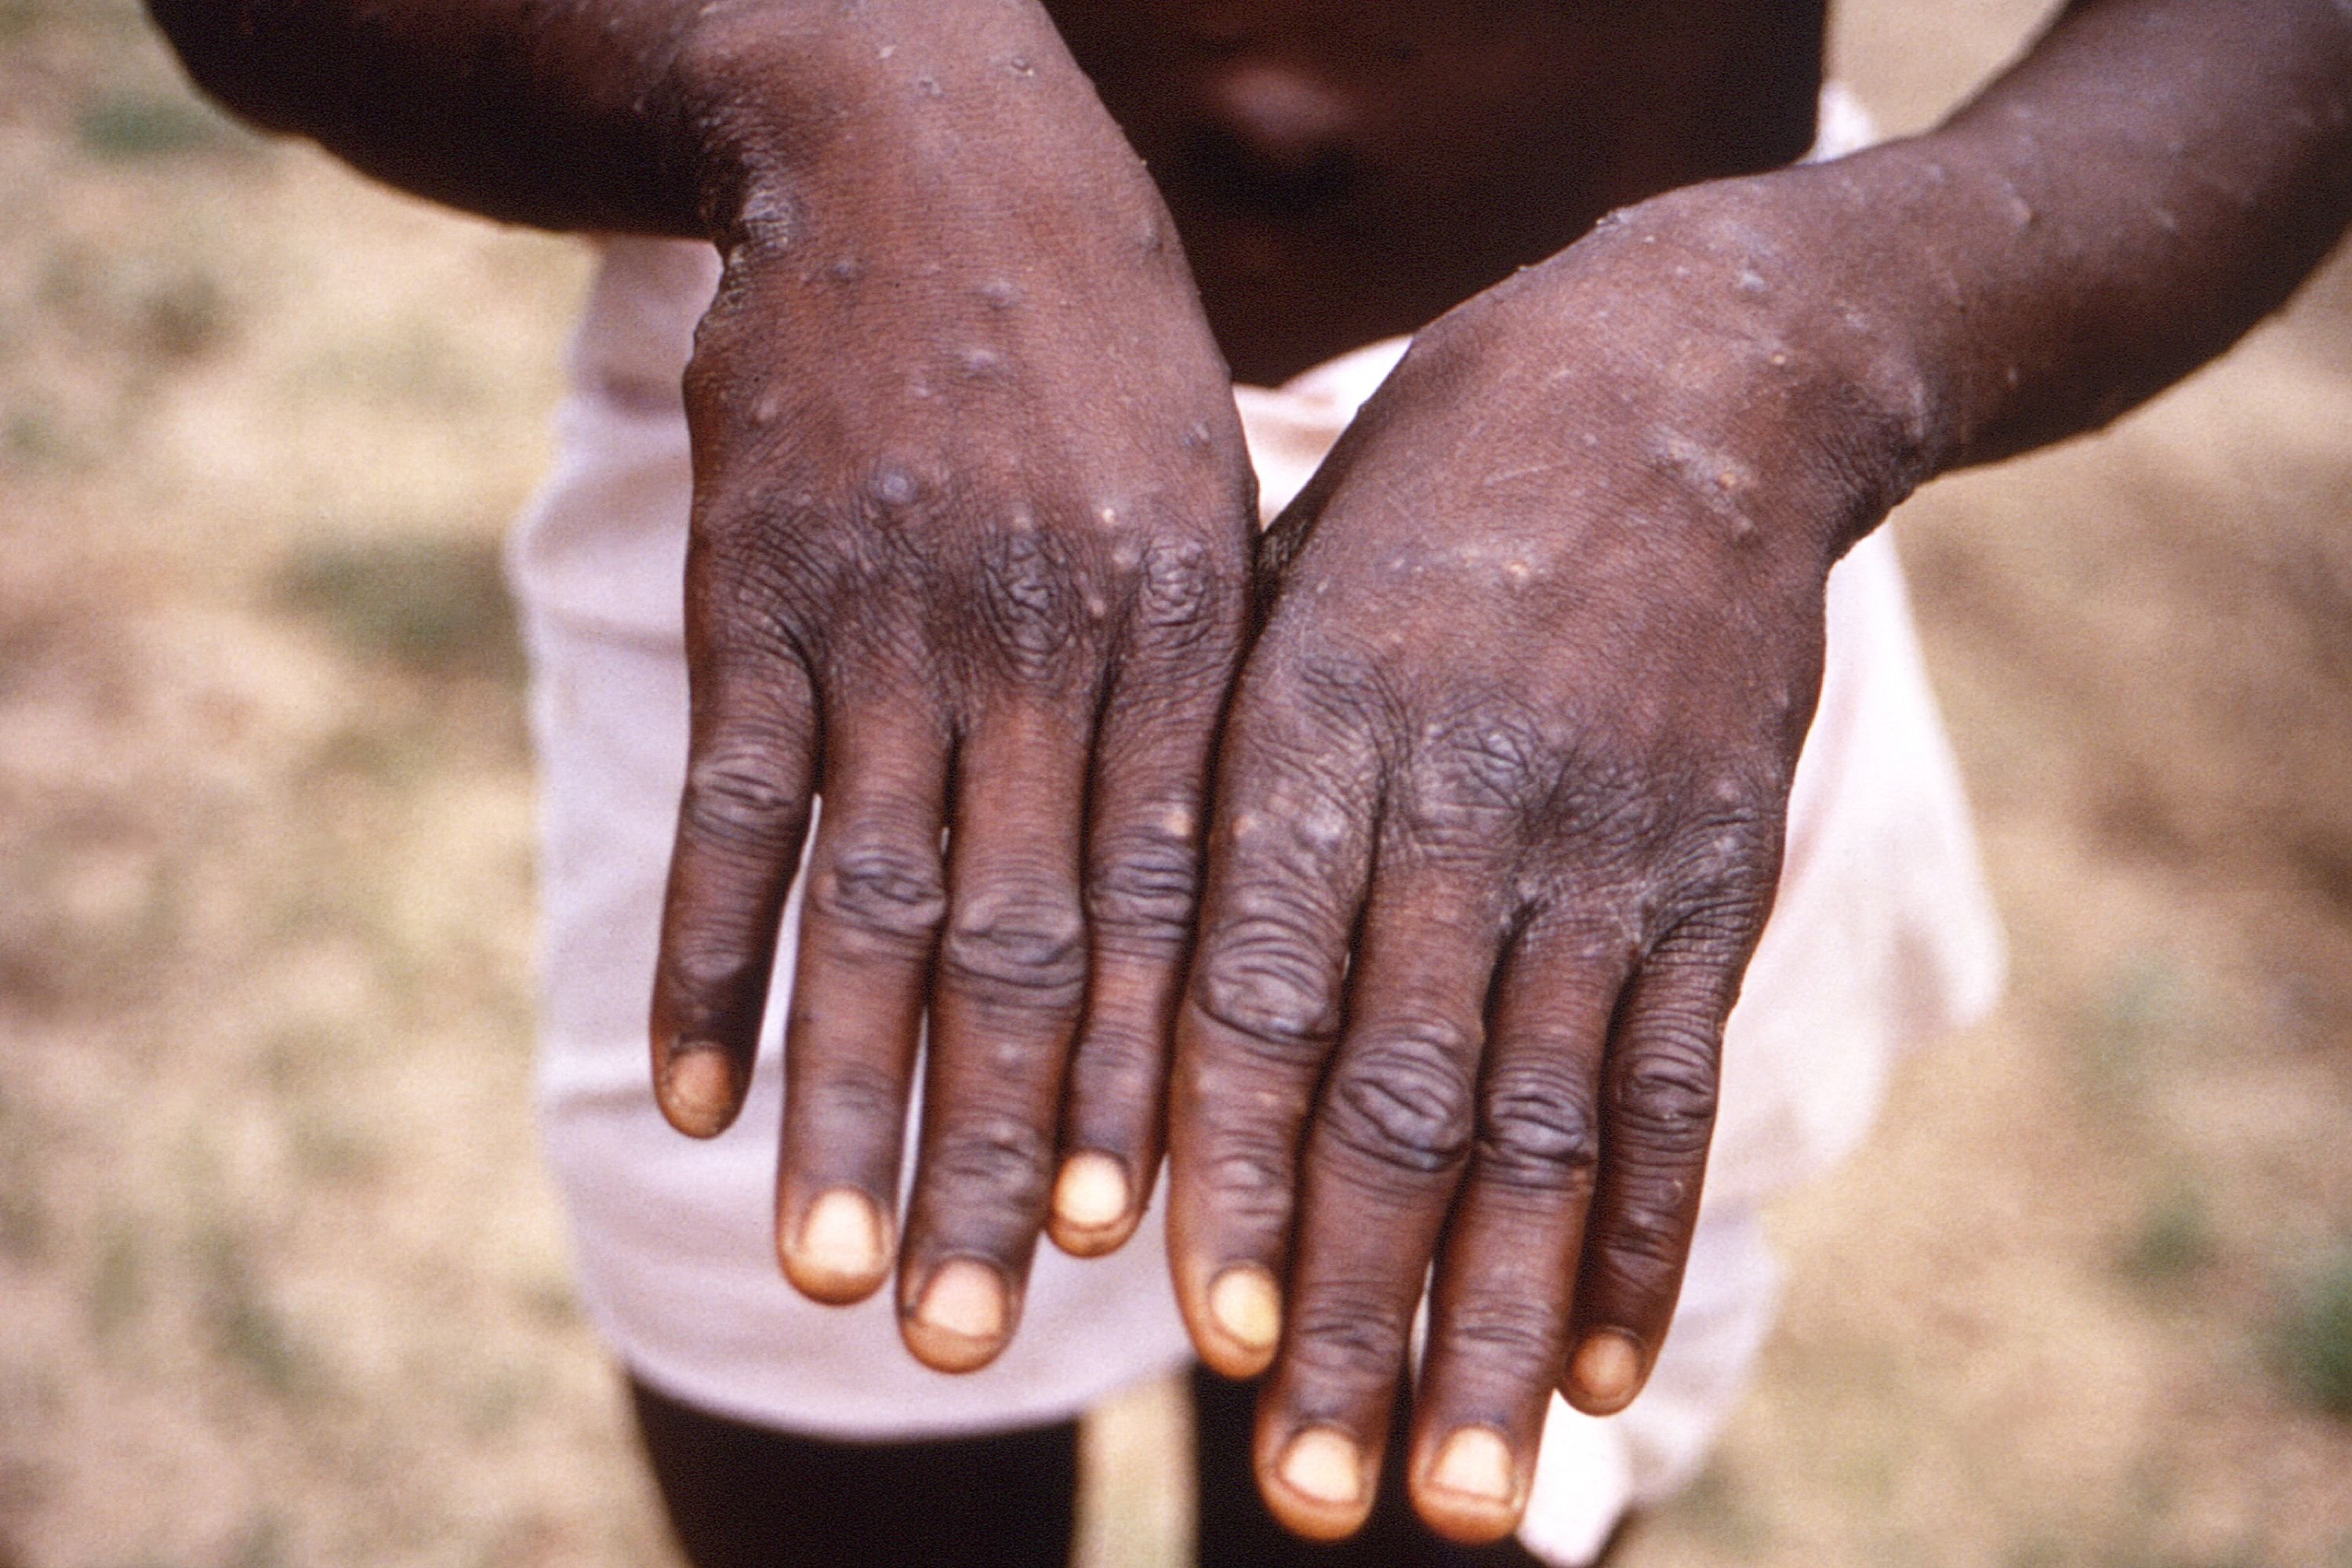 Monkeypox: More countries report first cases as outbreak grows | Daily Sabah